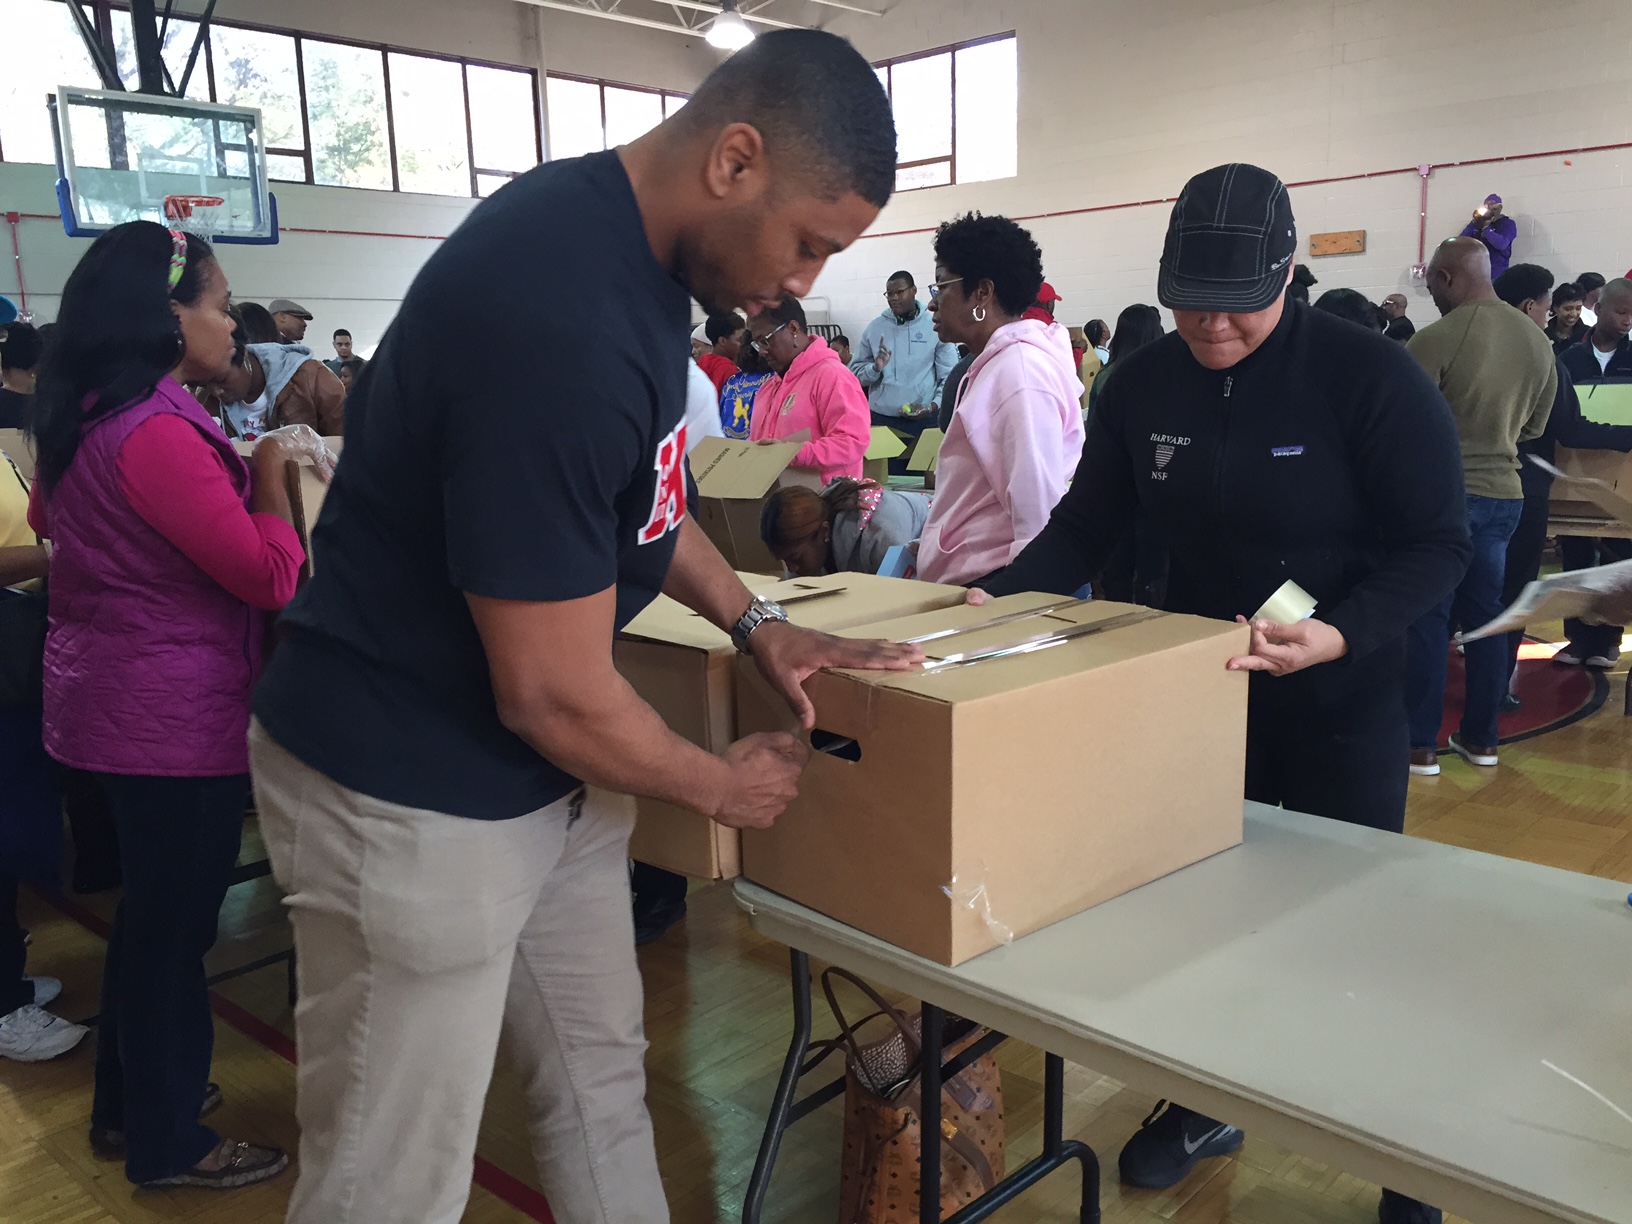 Volunteers came from near and far to help Northern Virginia Project Giveback put together hundreds of boxes of food for those in need Saturday, Nov. 16, 2016 in Alexandria, Virginia. (WTOP/Dennis Foley)